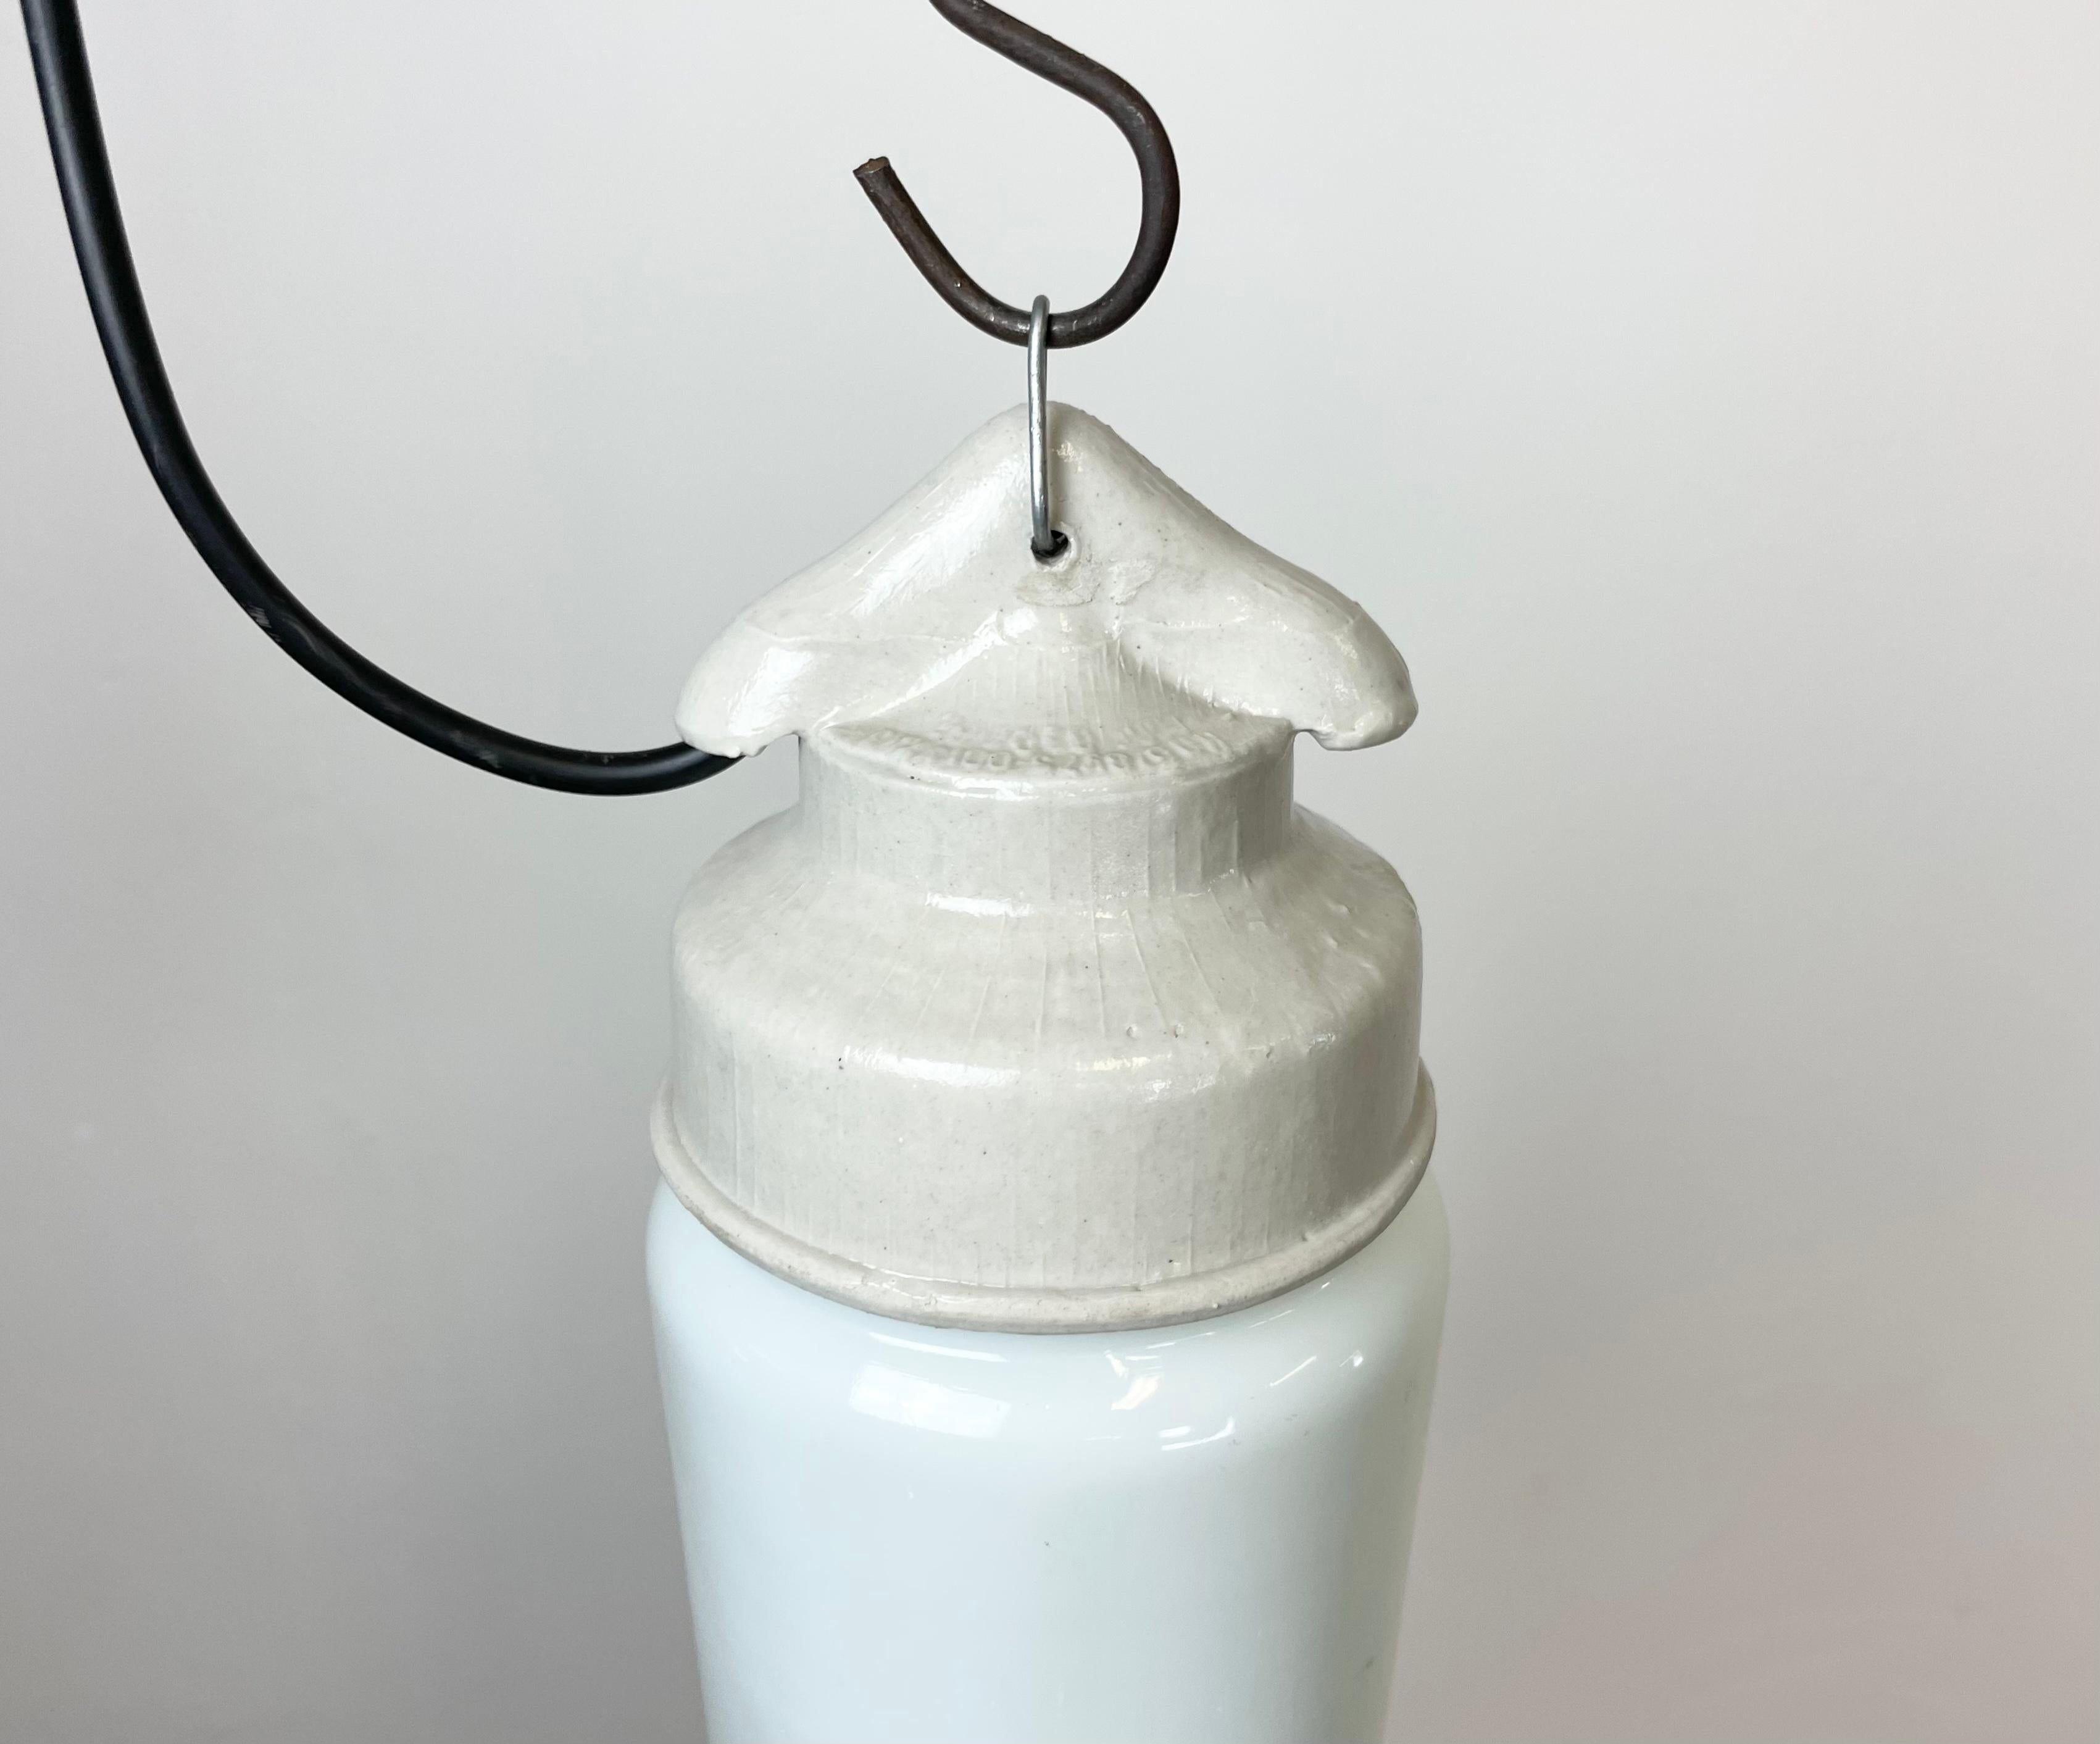 Russian Industrial White Porcelain Pendant Light with Milk Glass, 1970s For Sale